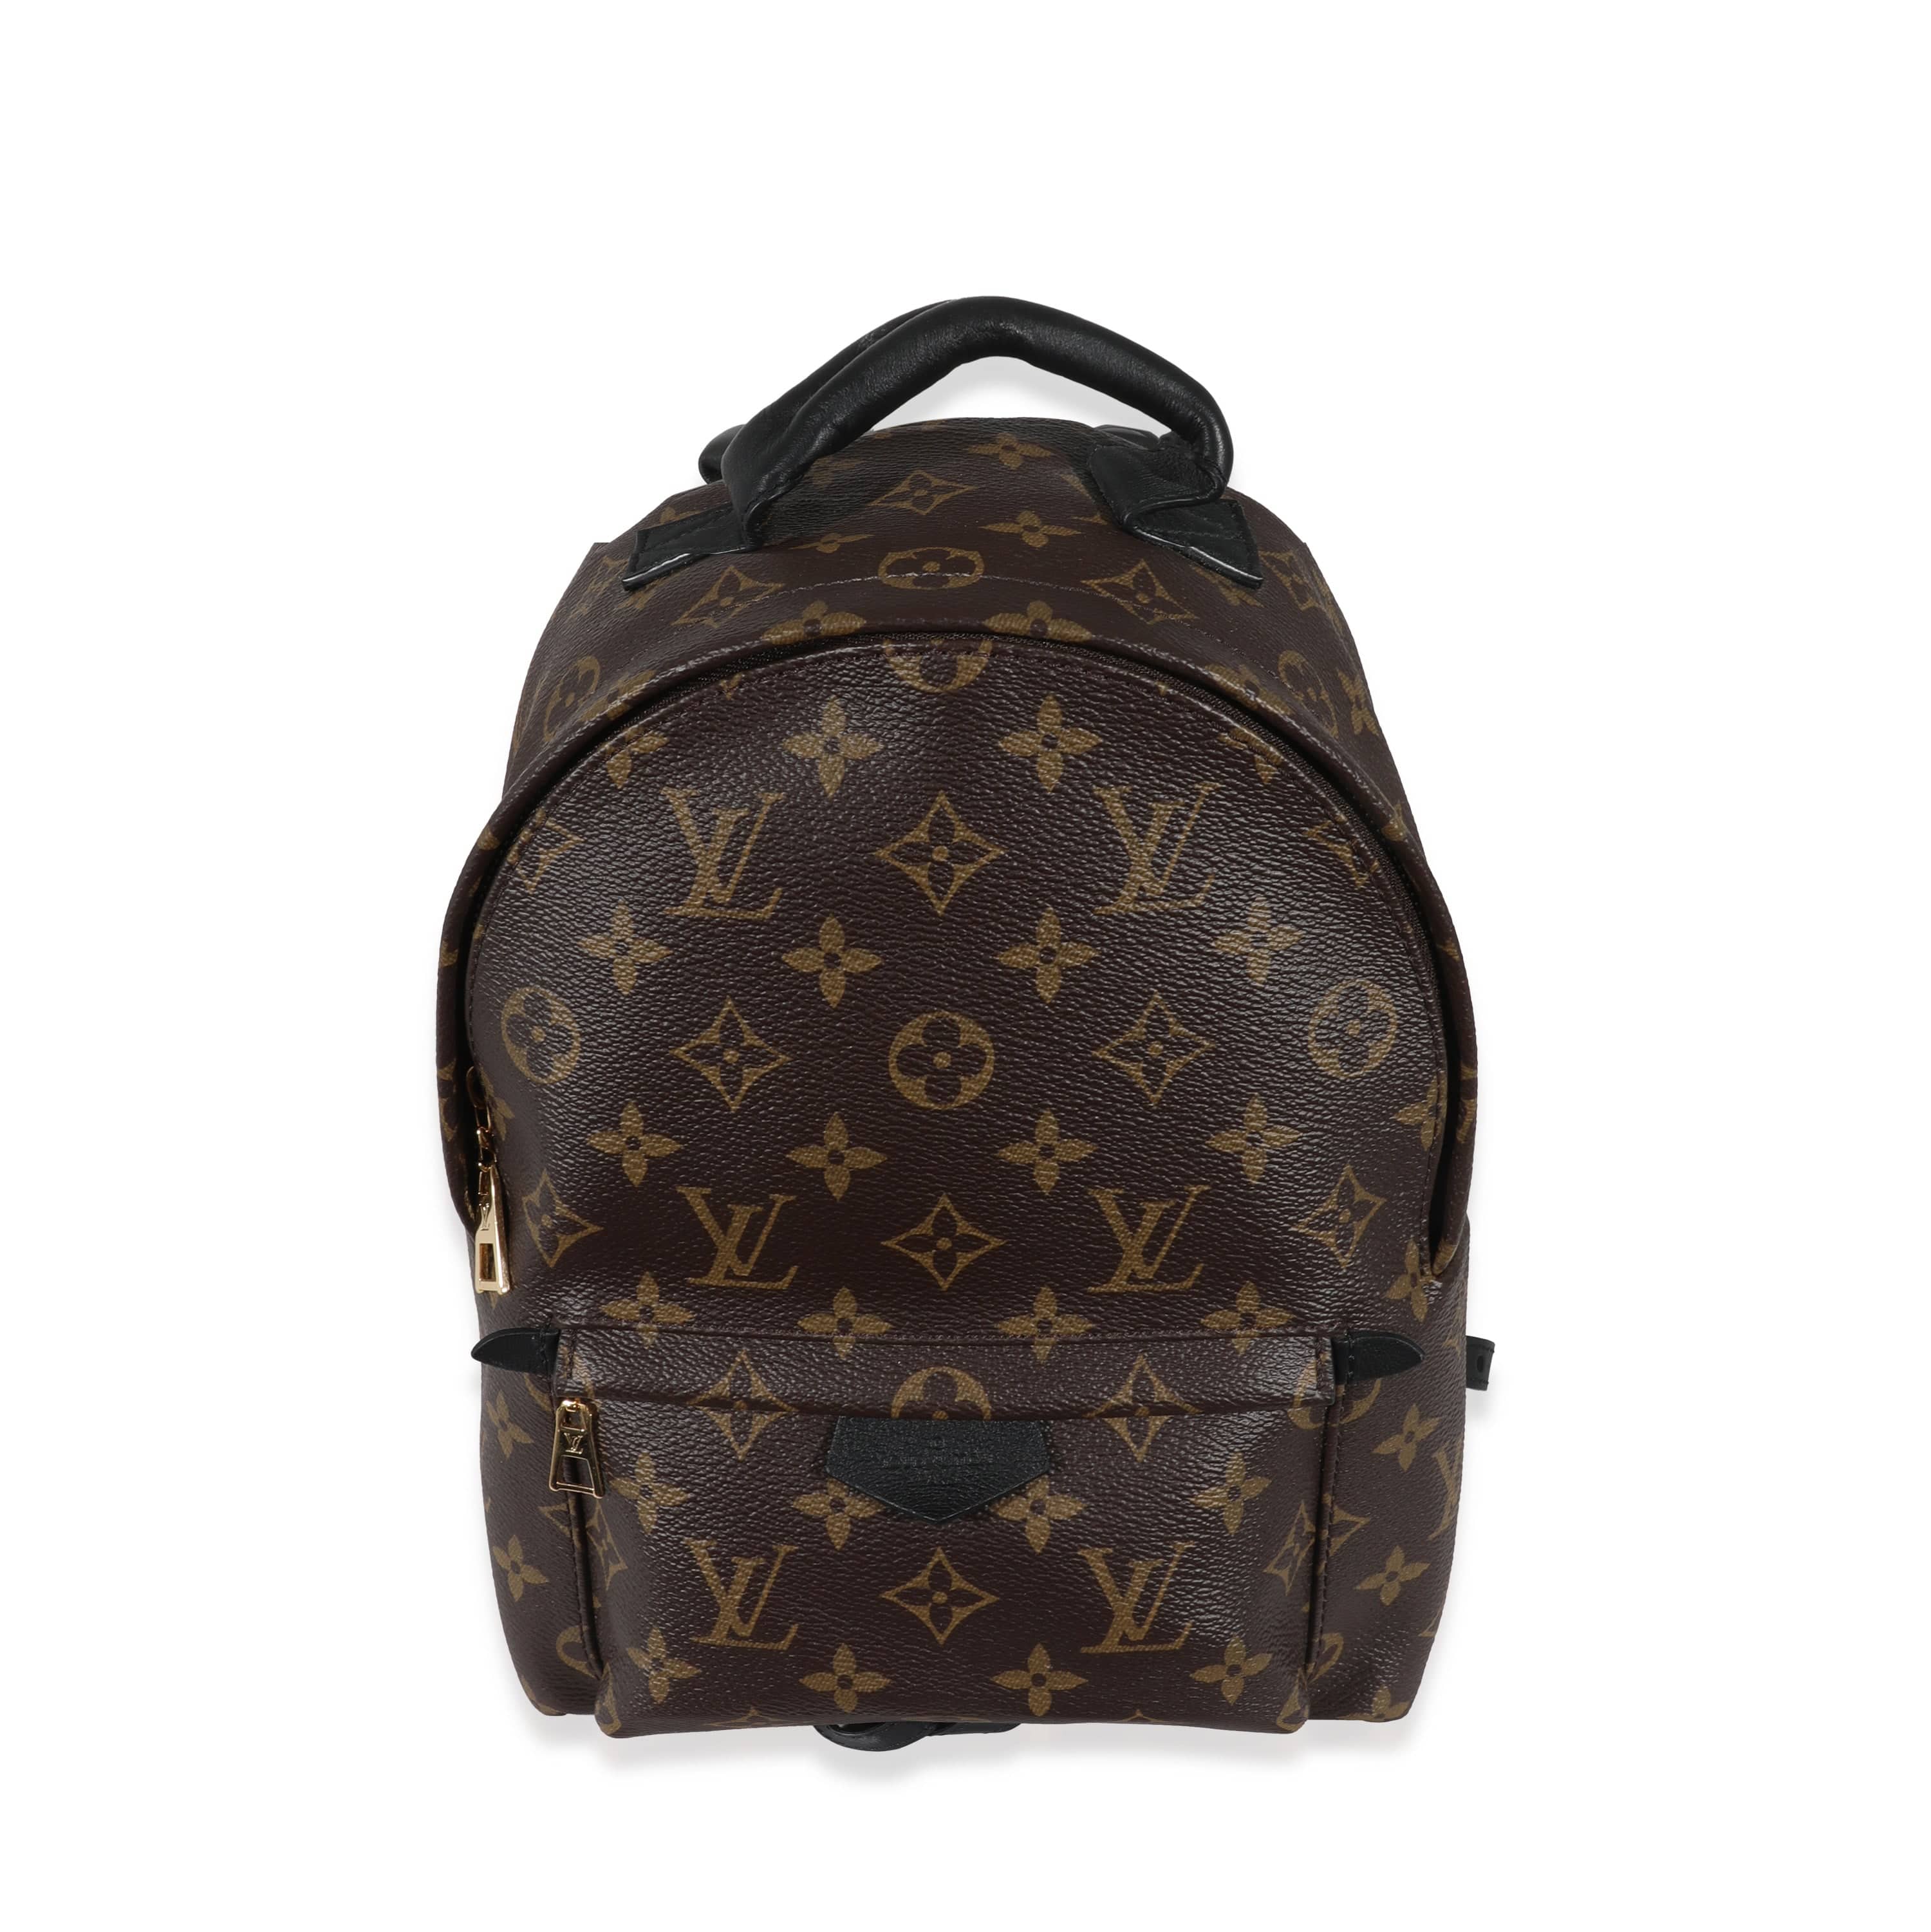 Louis Vuitton Palm Springs PM Backpack in Monogram Canvas